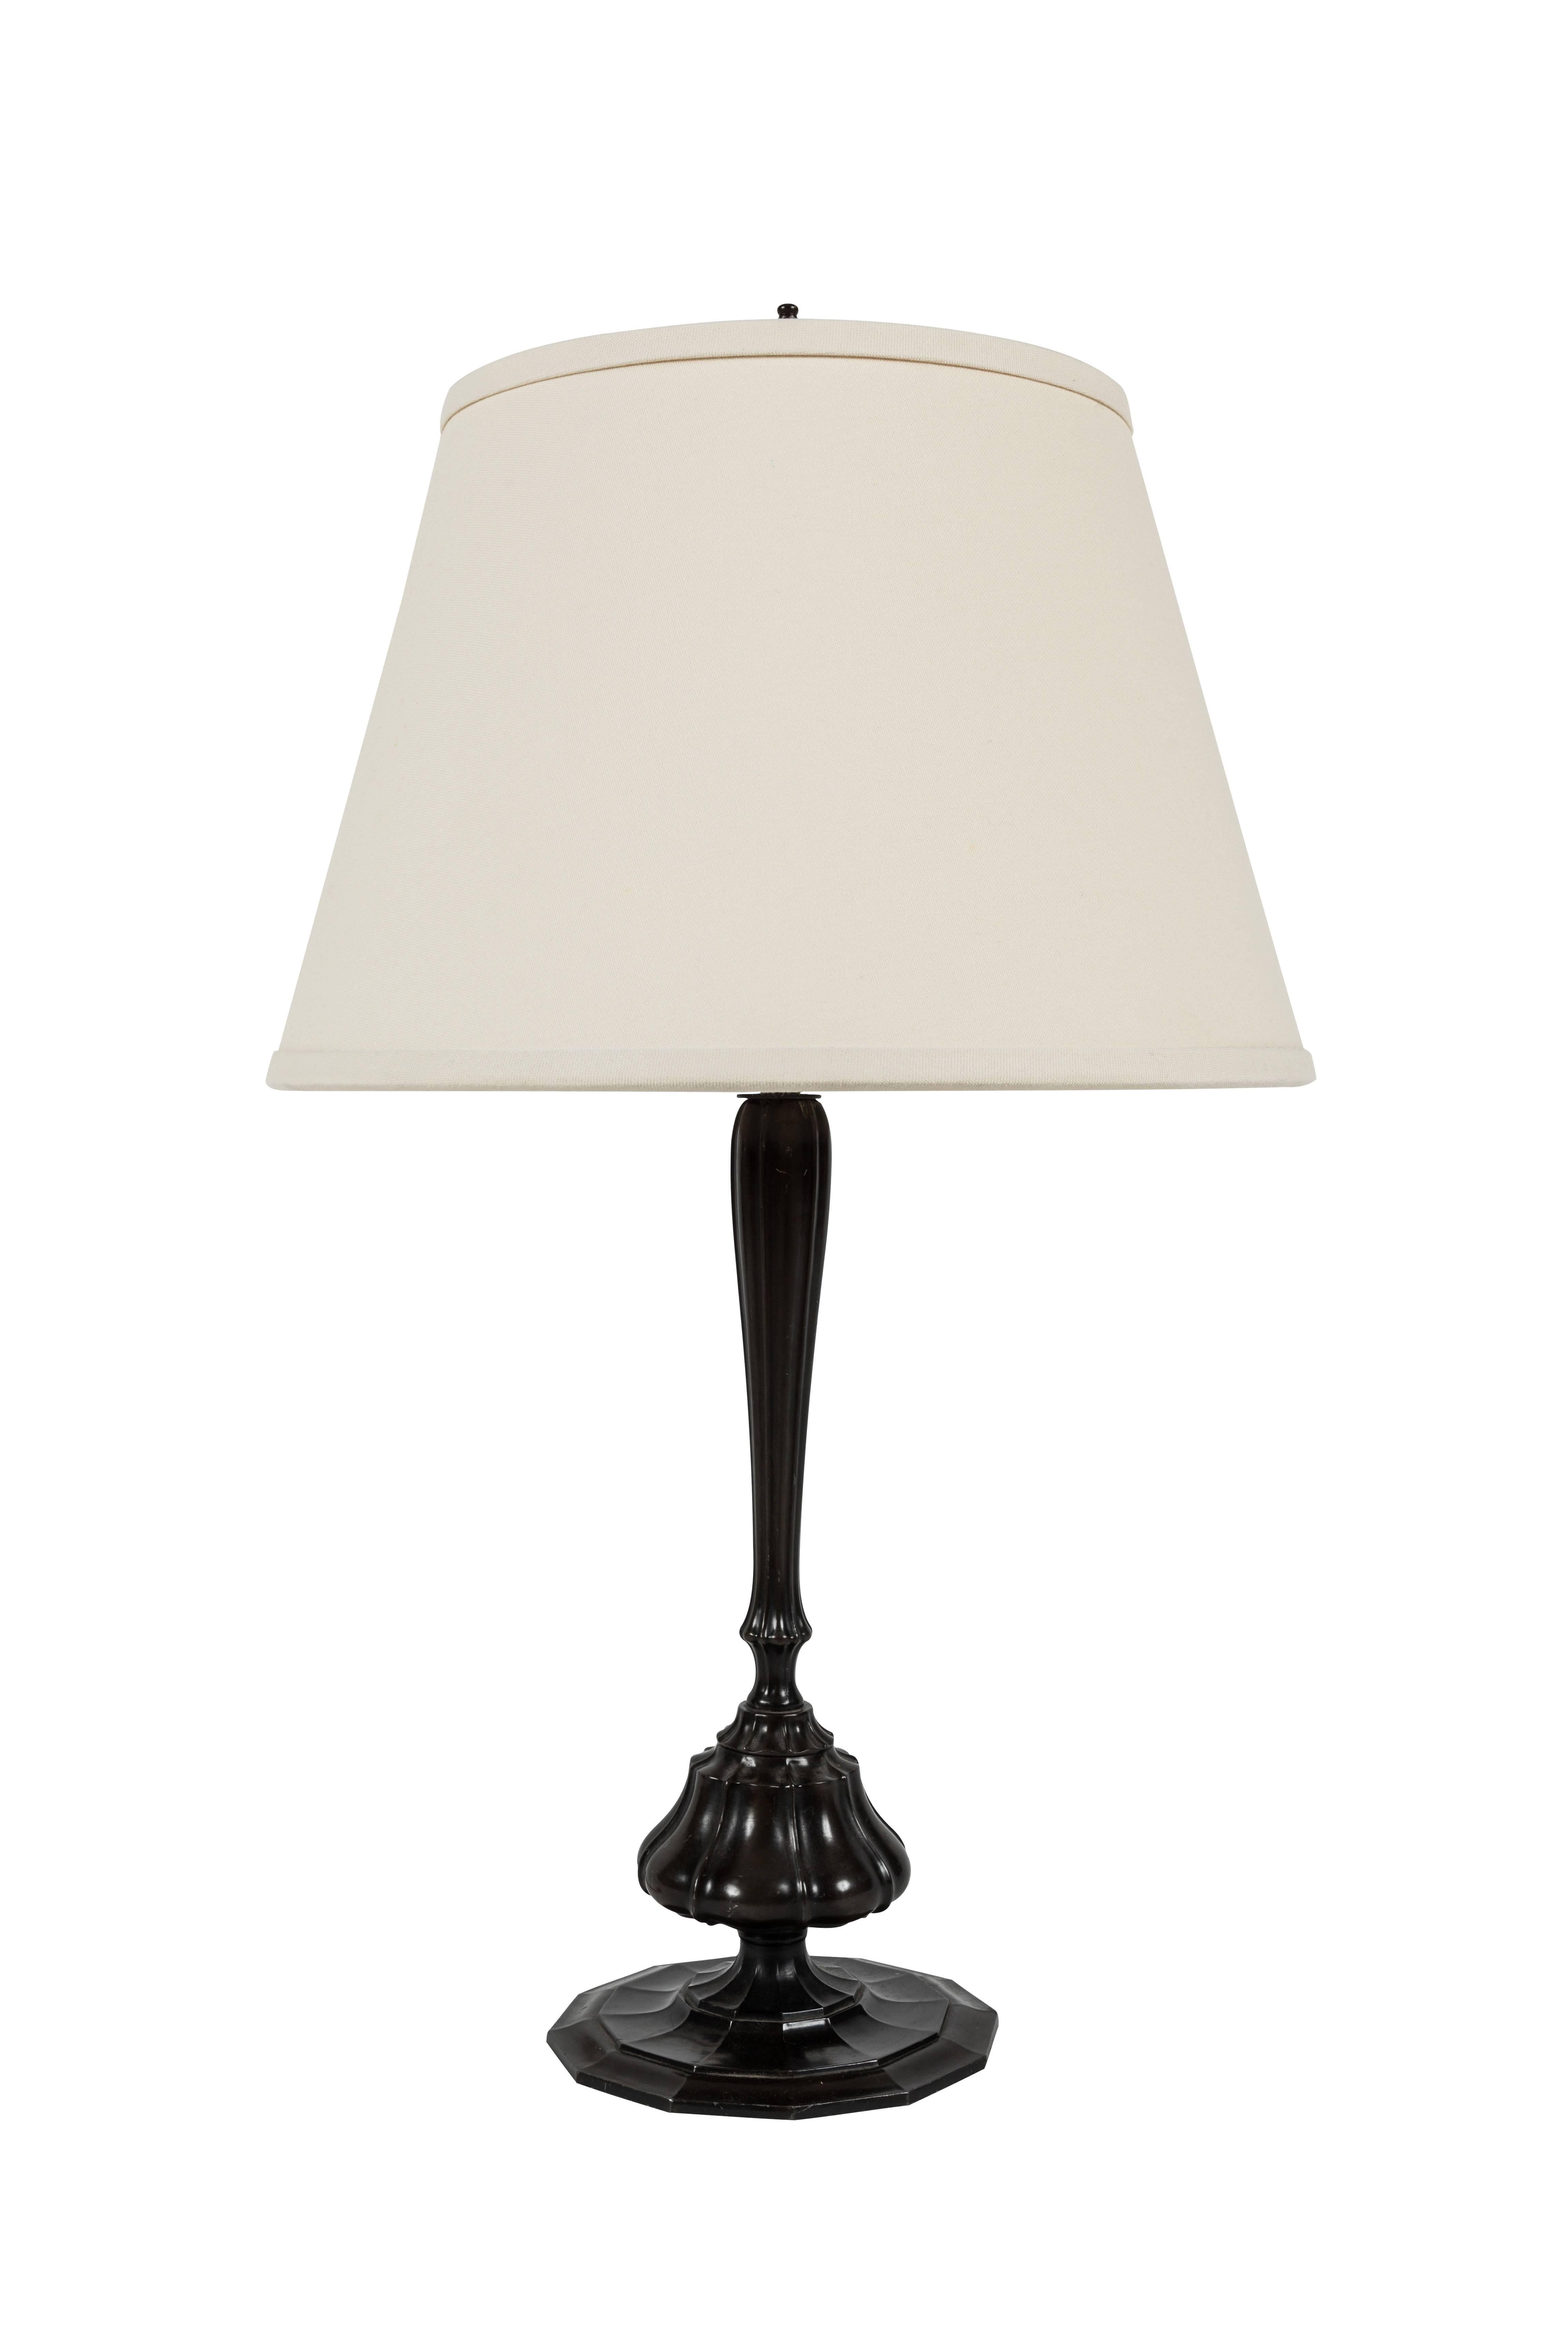 20th Century Just Andersen Table Lamp For Sale